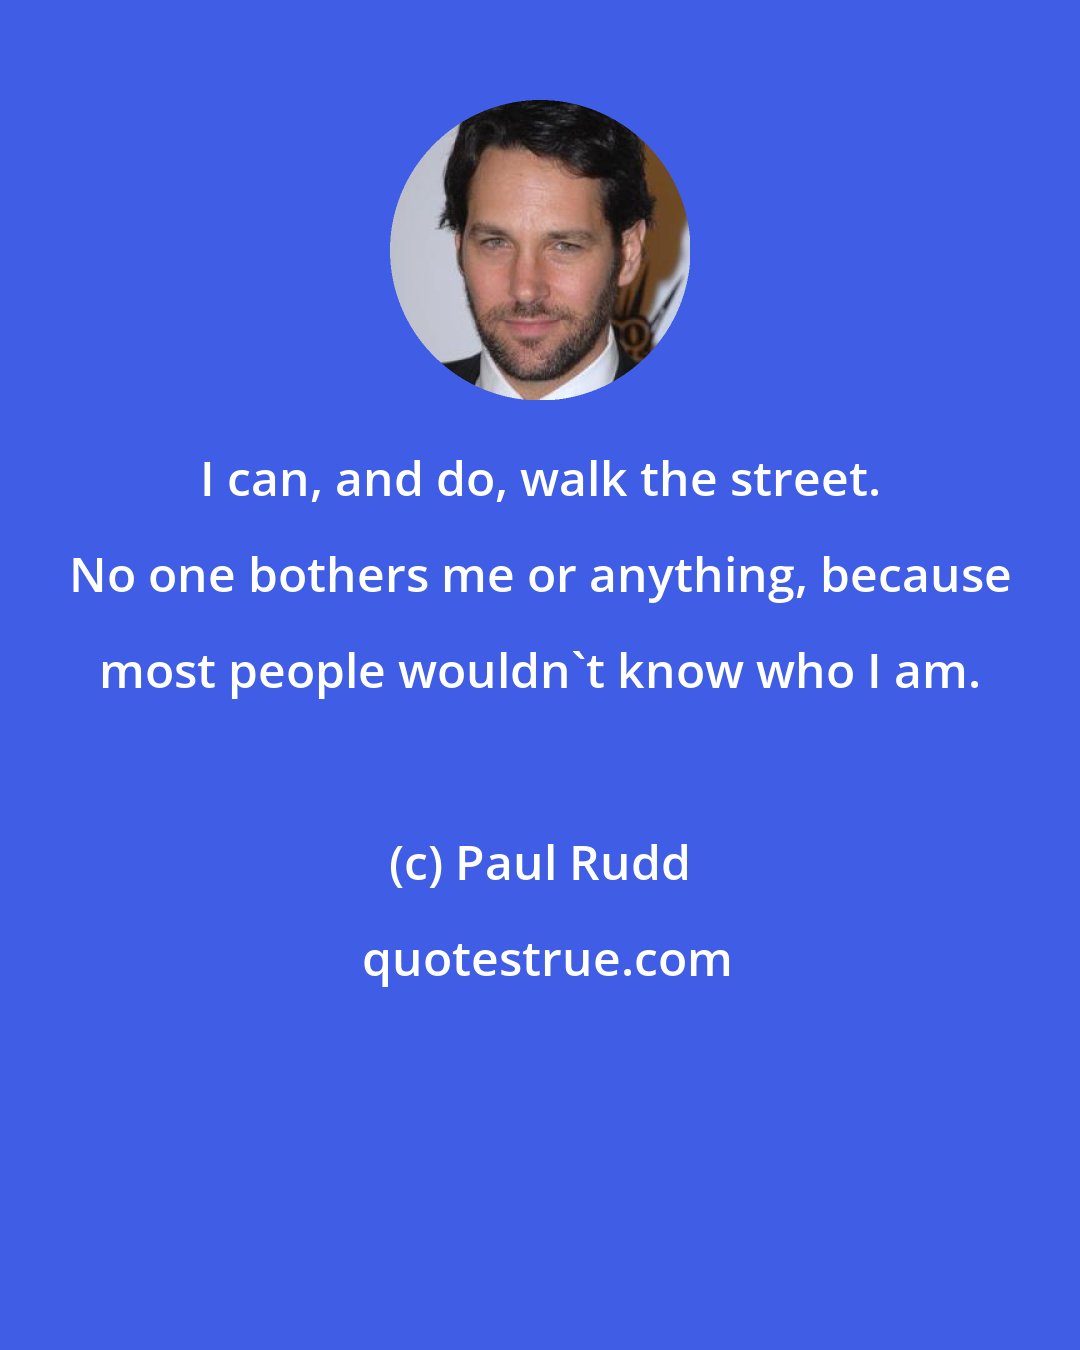 Paul Rudd: I can, and do, walk the street. No one bothers me or anything, because most people wouldn't know who I am.